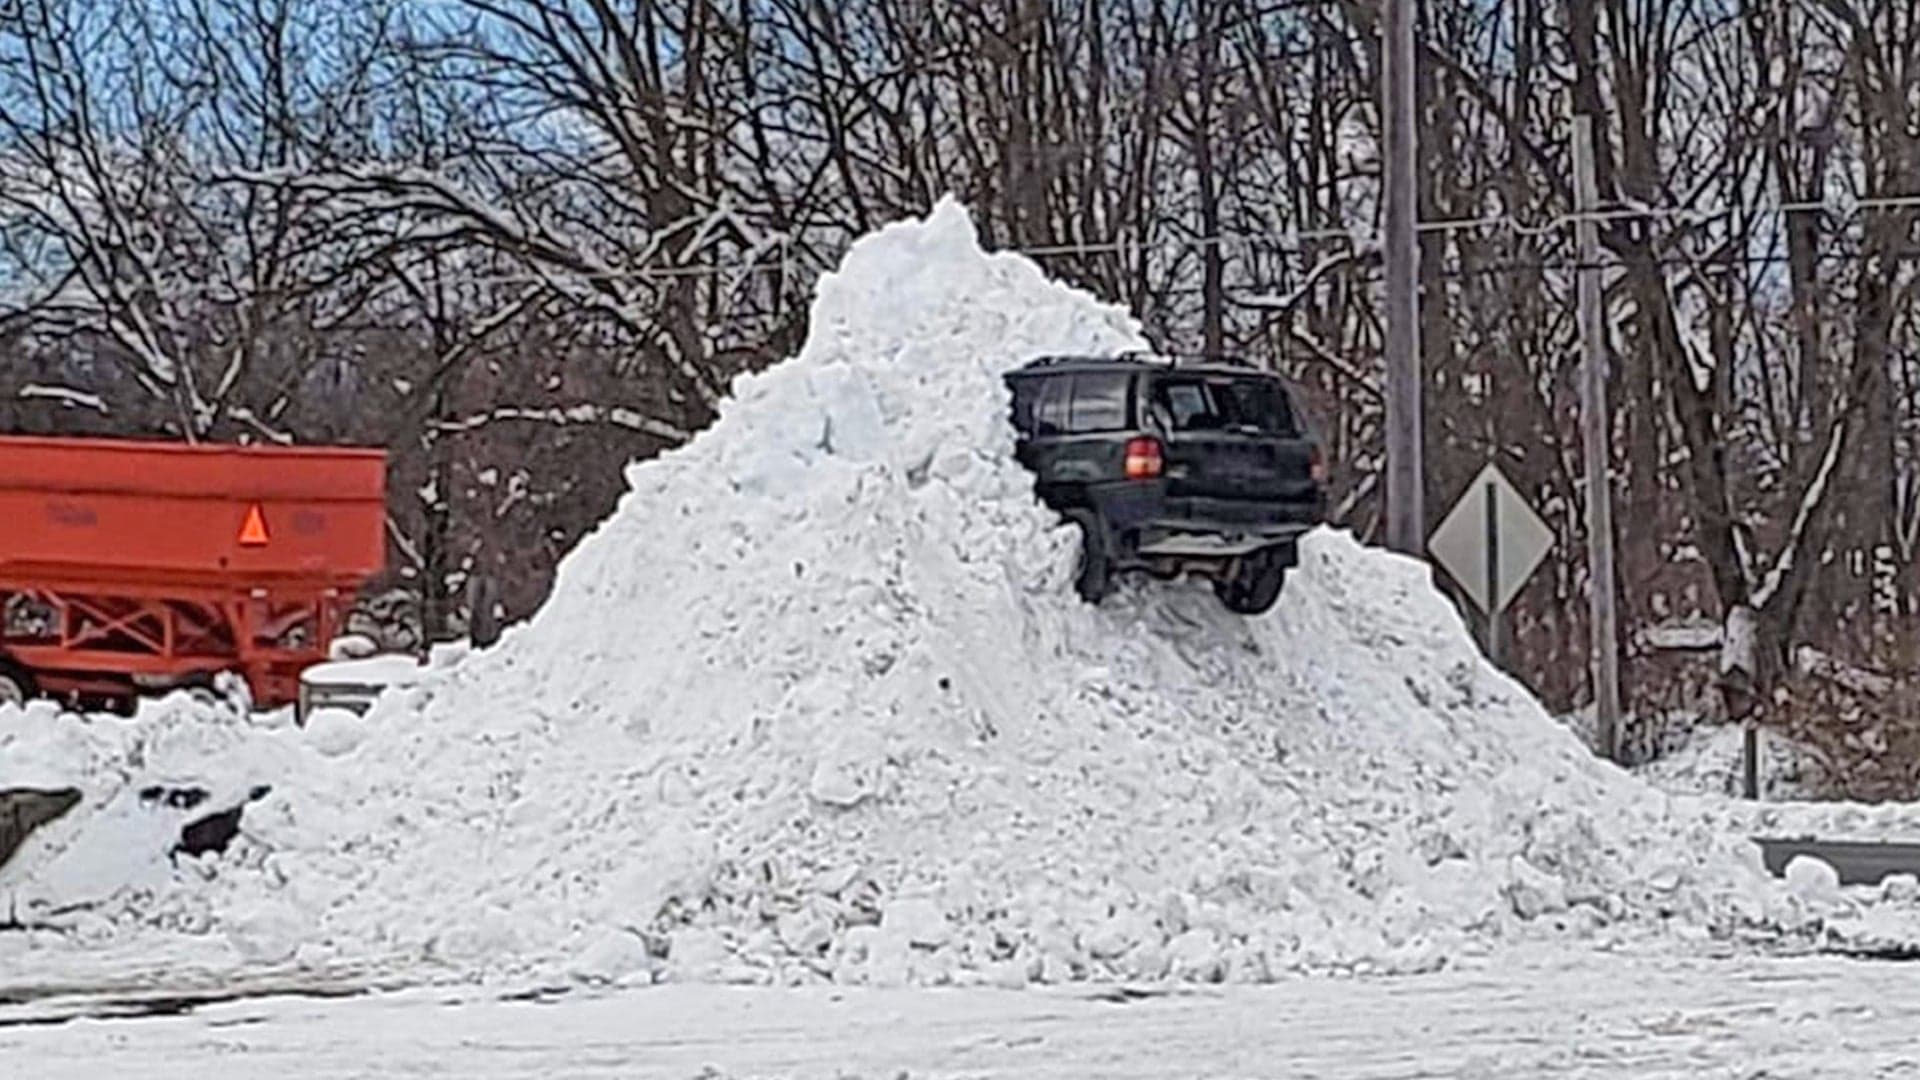 The Viral Jeep Grand Cherokee Stuck High In a Snow Pile Was Put There on Purpose